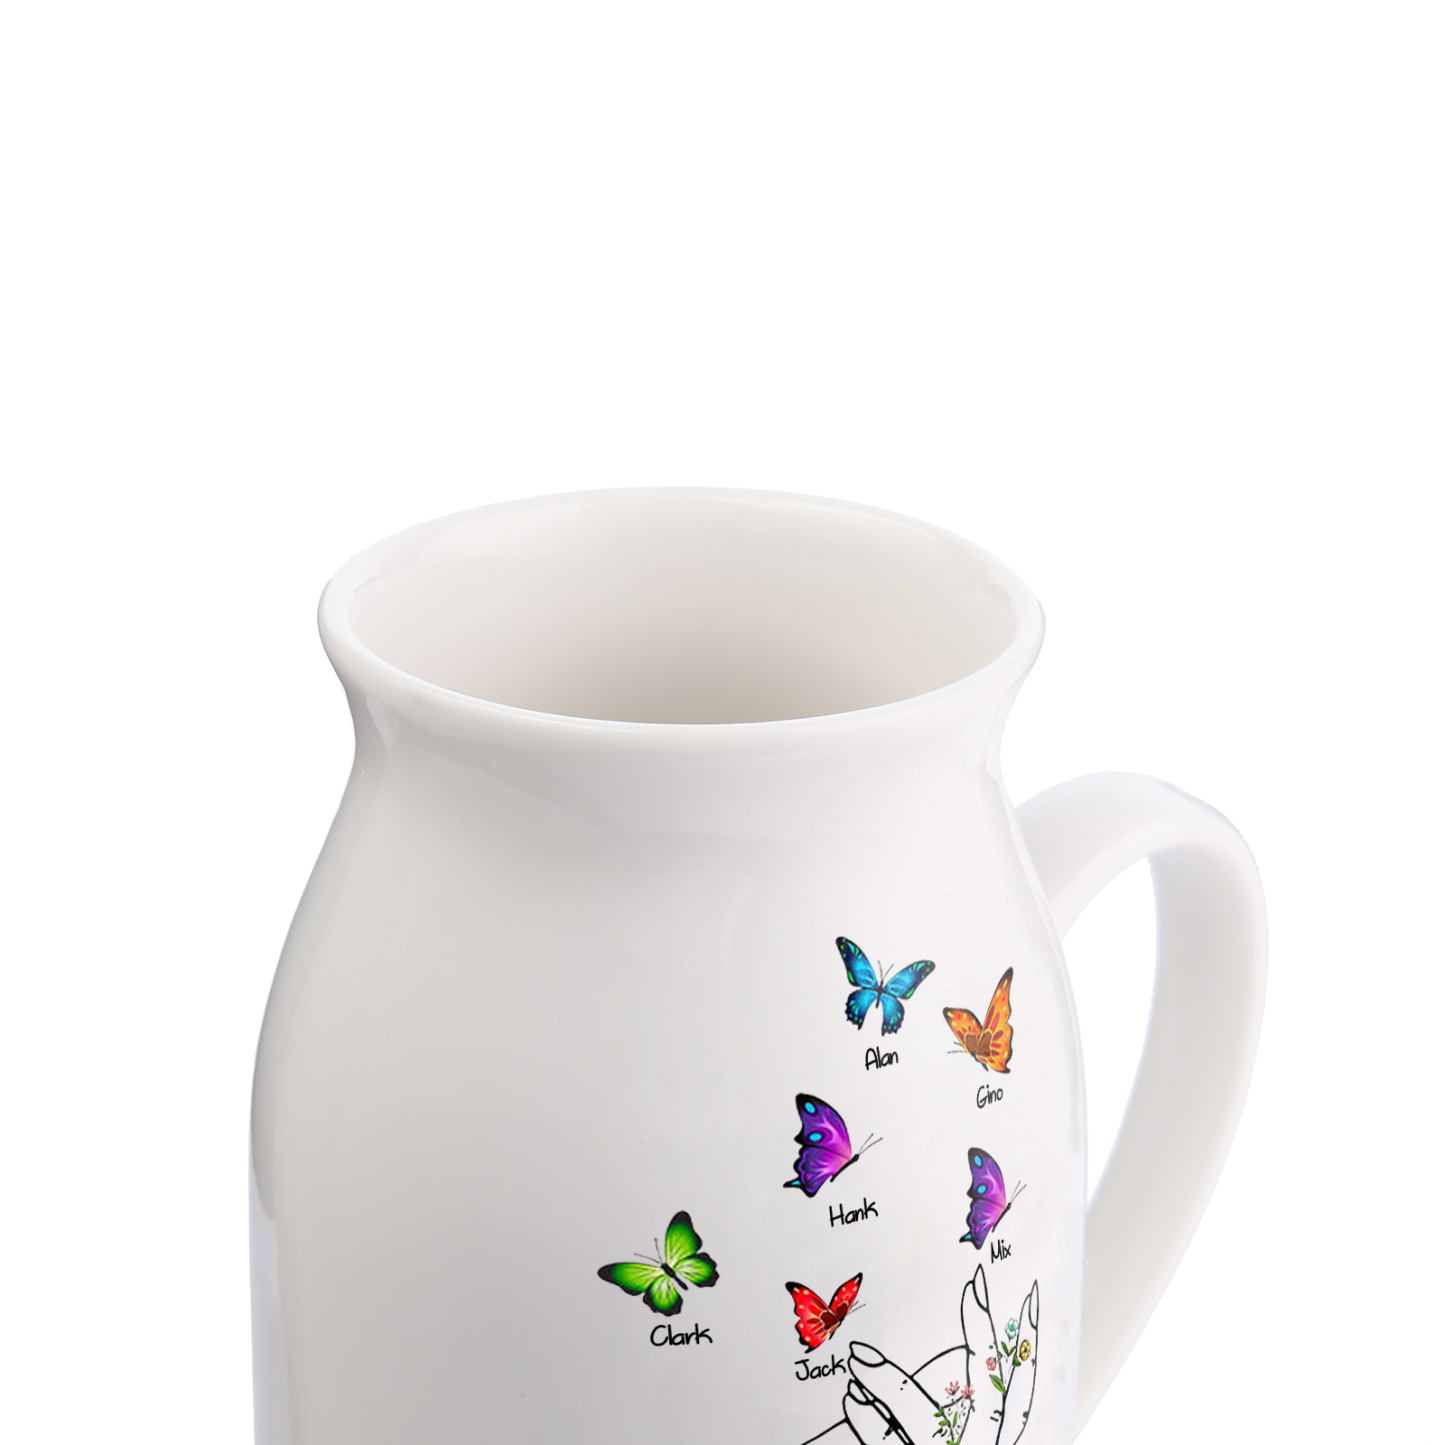 6 Names - Personalized Exquisite Flower Hand Butterfly Style Ceramic Cup With Customizable Names As a Special Gift For Nana/Mom